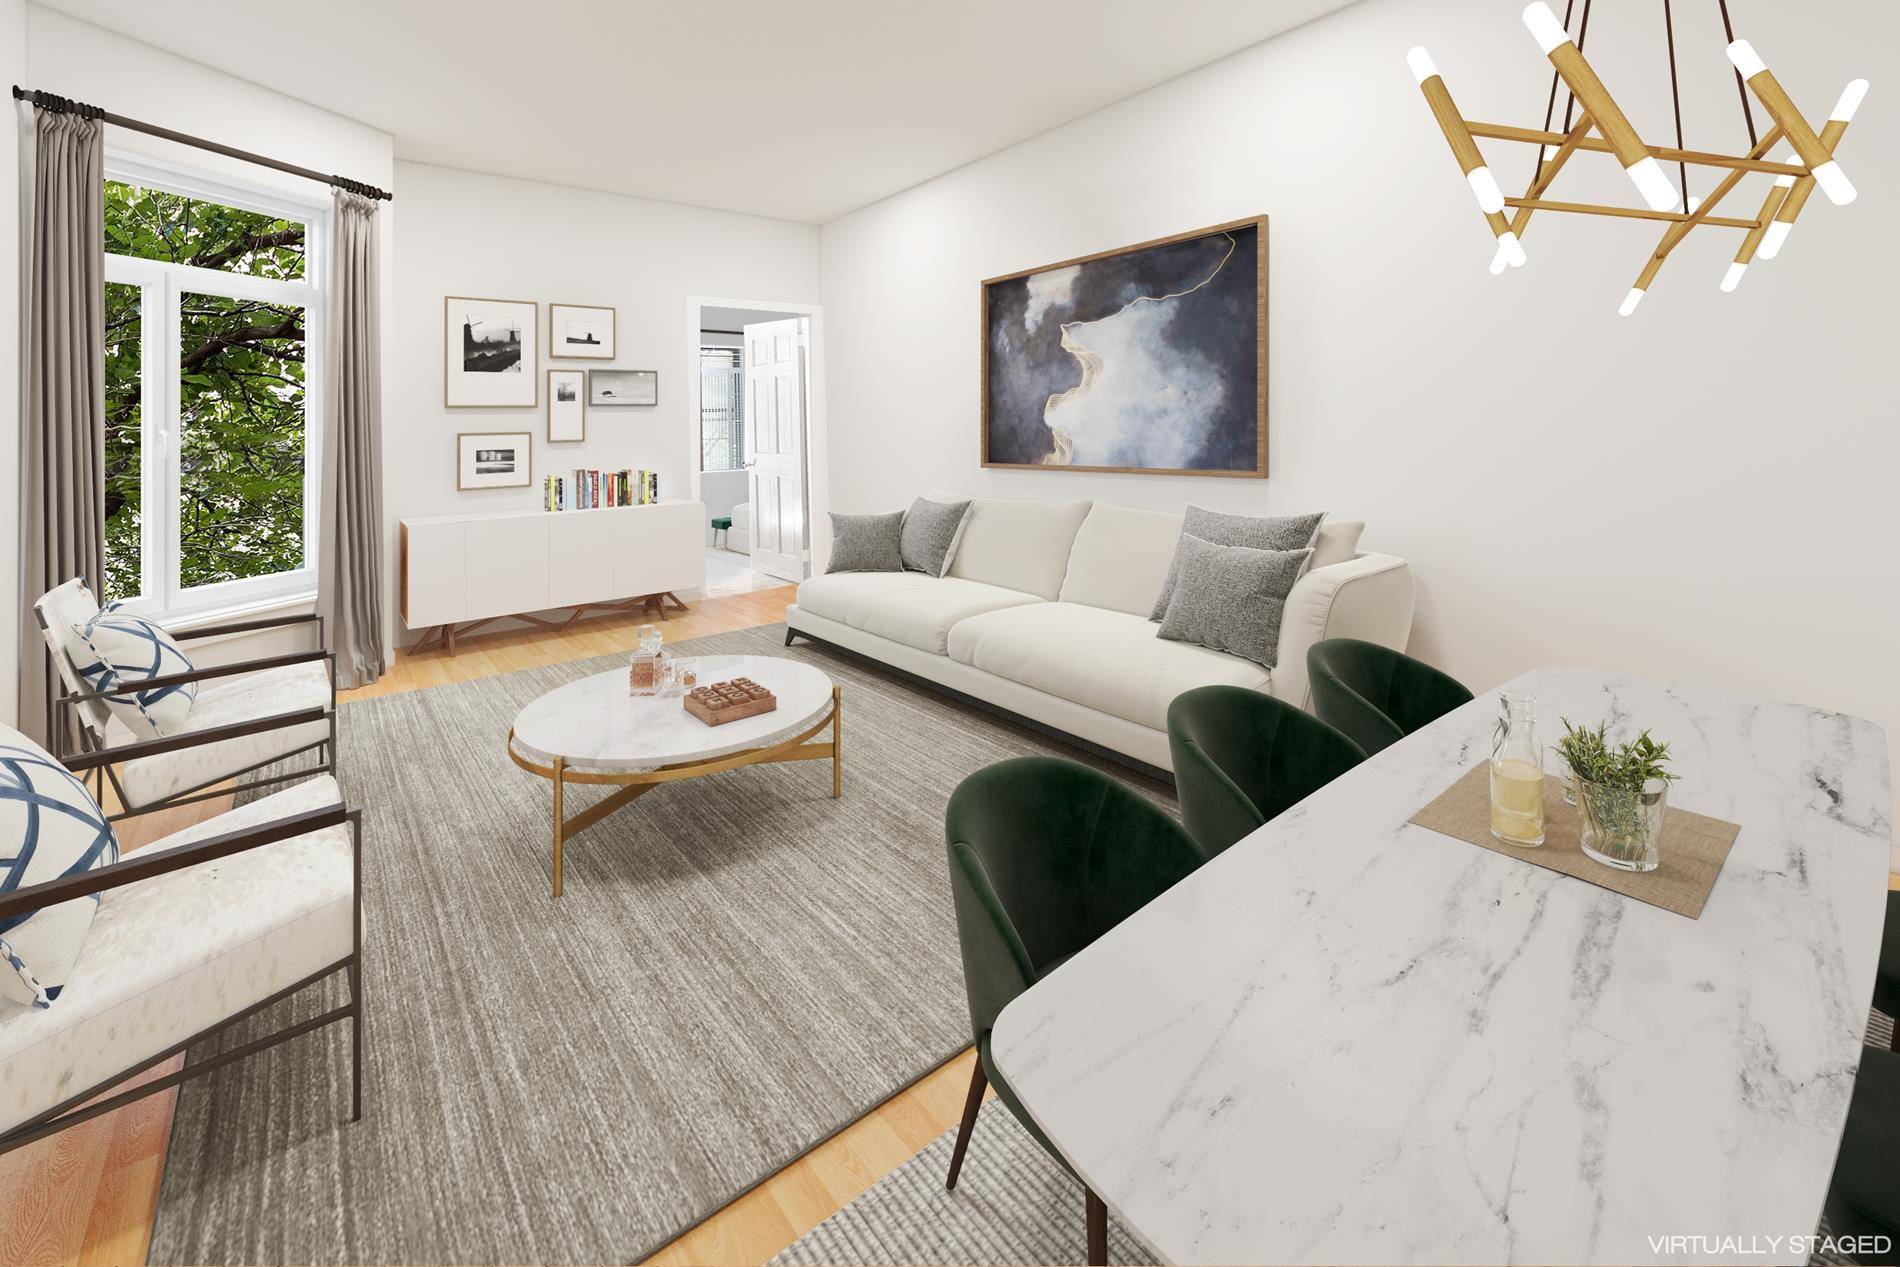 Own your own piece of Manhattan for less than renting.